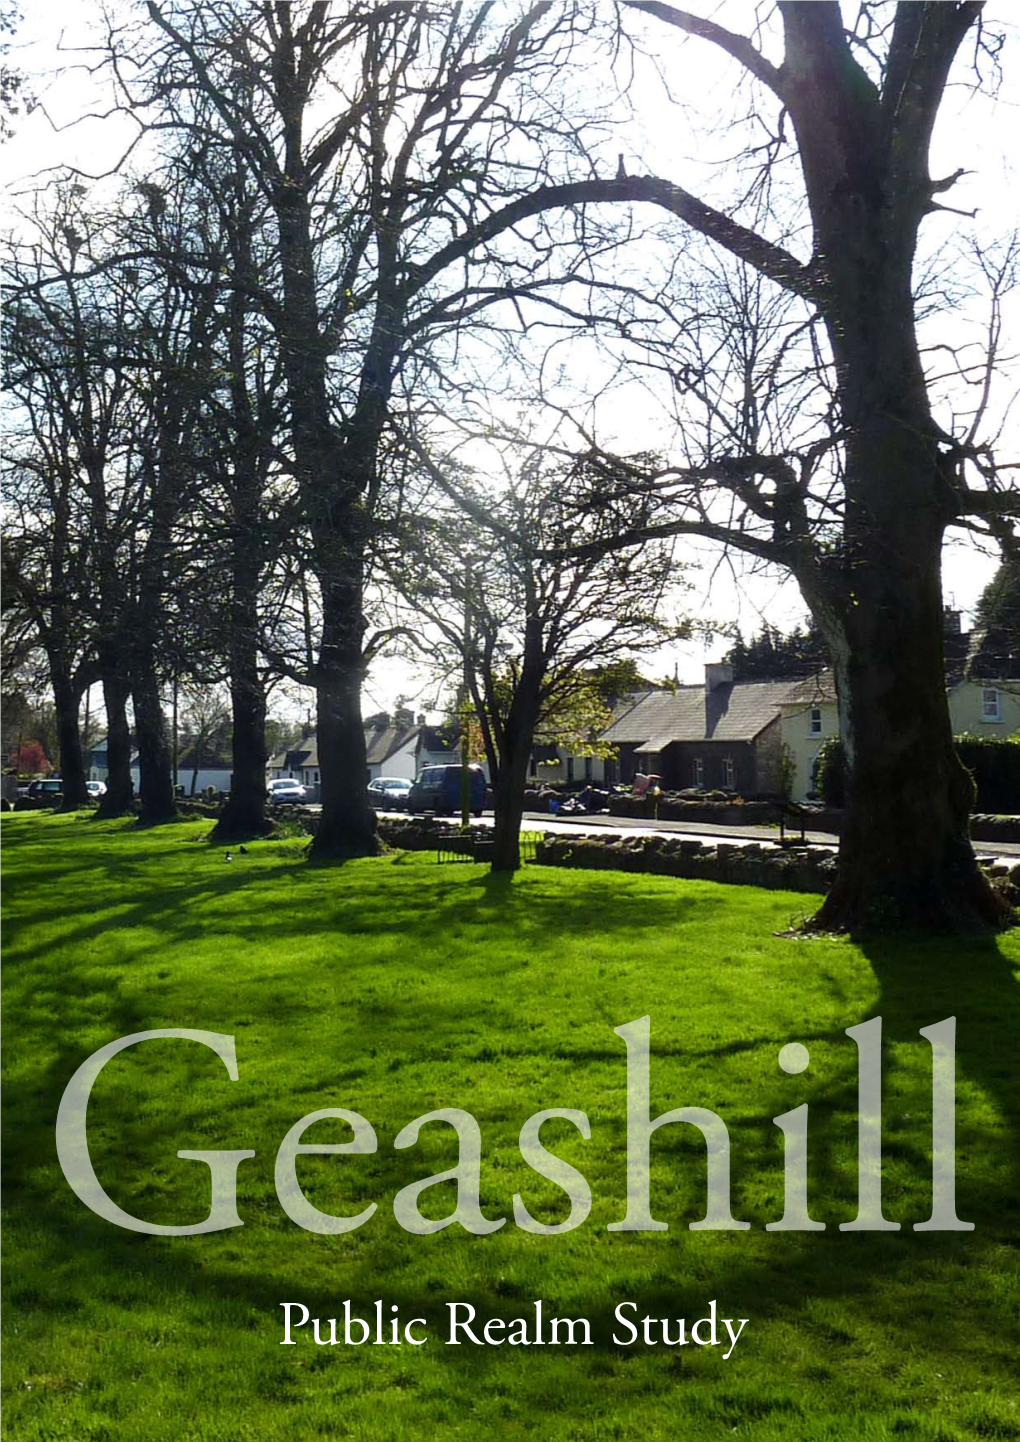 Public Realm Study May 2012 Introduction Geashill Is a Small and Beautiful Village in the Irish County of Offaly